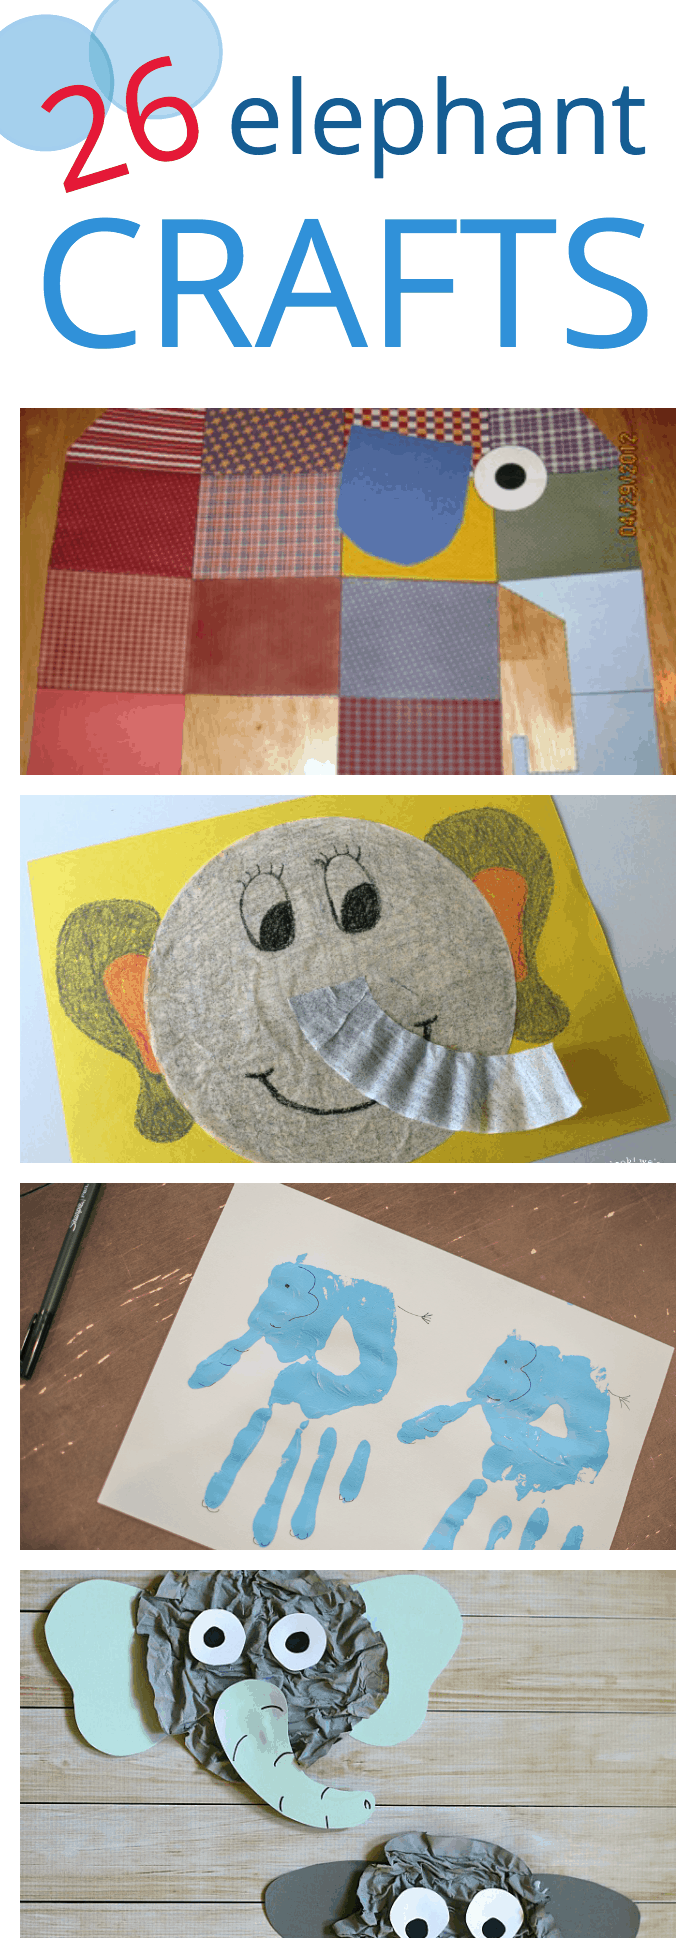 26 elephant craft ideas for all ages